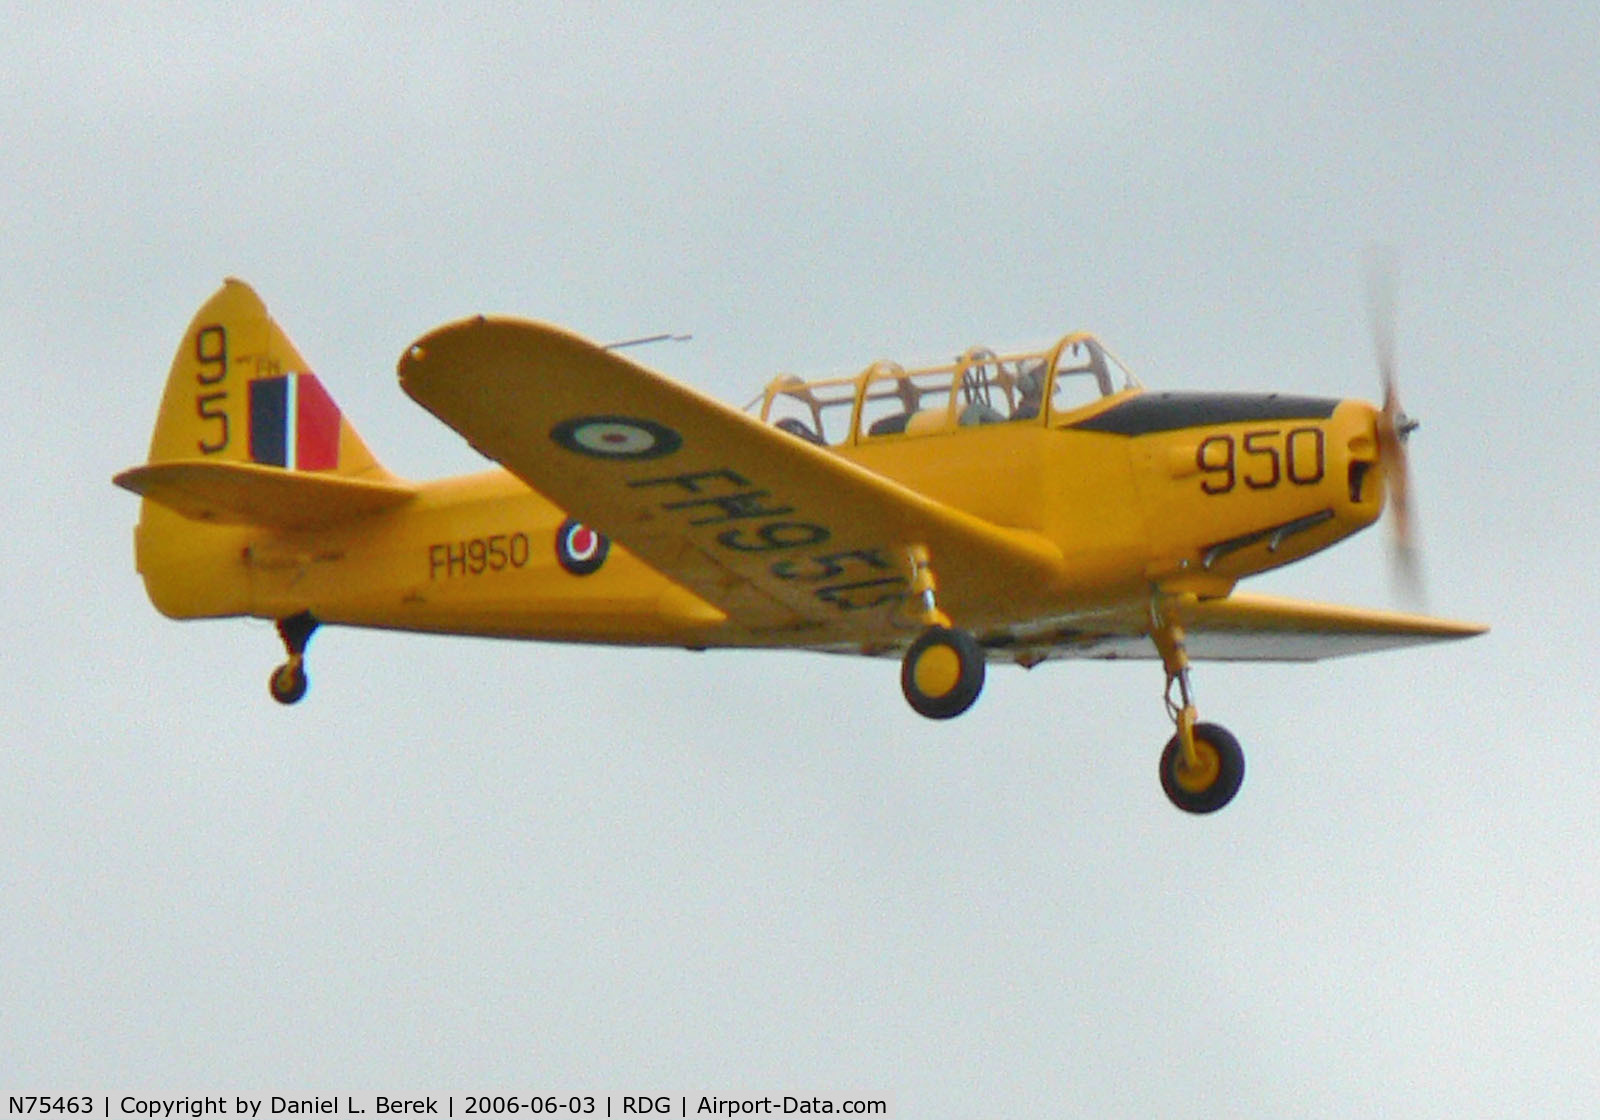 N75463, 1943 Fairchild M-62A-4 C/N T42-4299, She's a bright, yellow crowd pleaser every time!